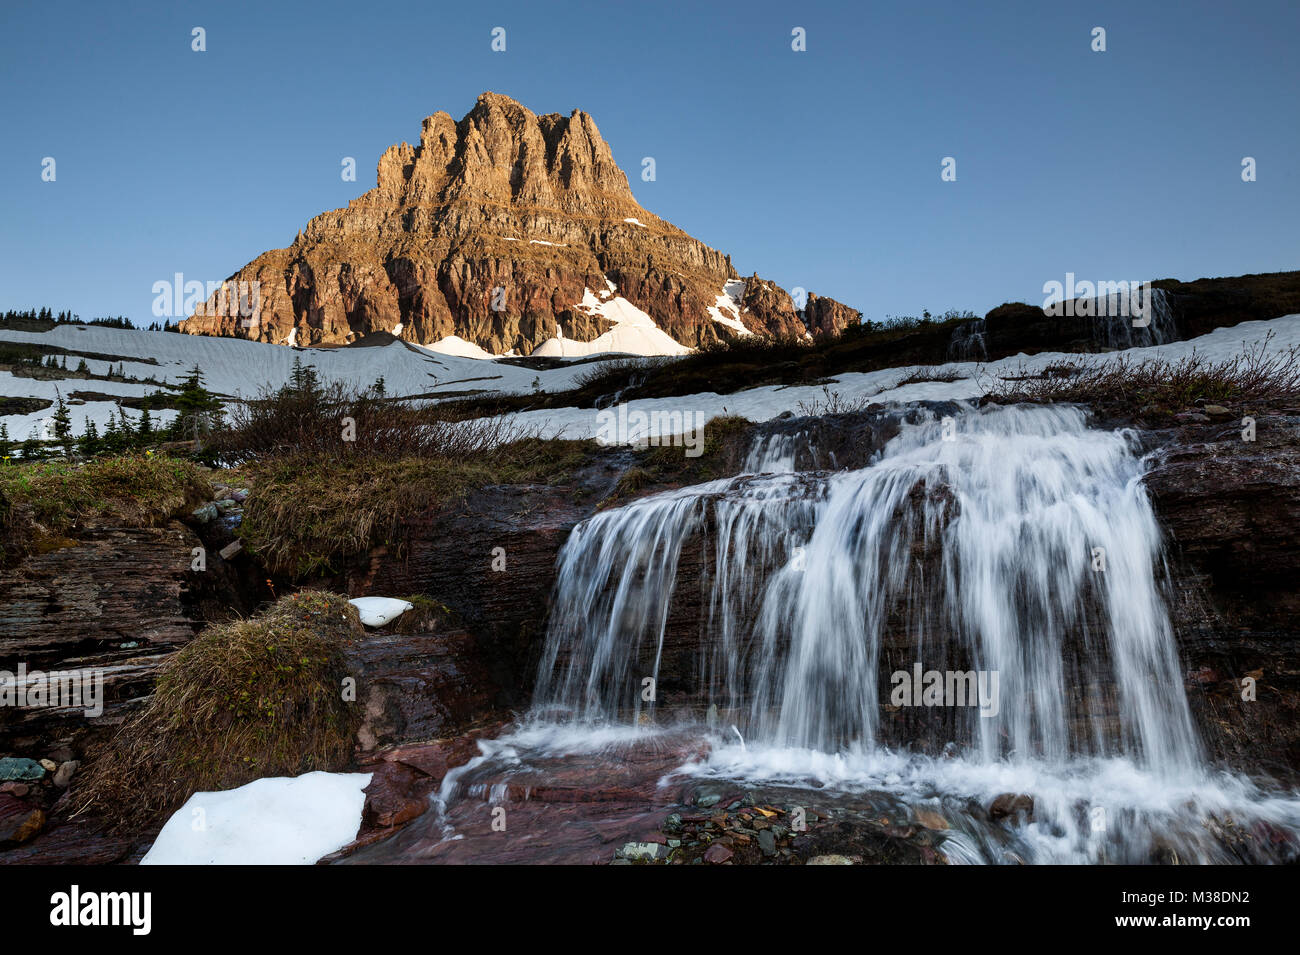 MT00130-00...MONTANA - Clements Mountain and waterfall at Logan Pass in Glacier National Park. Stock Photo